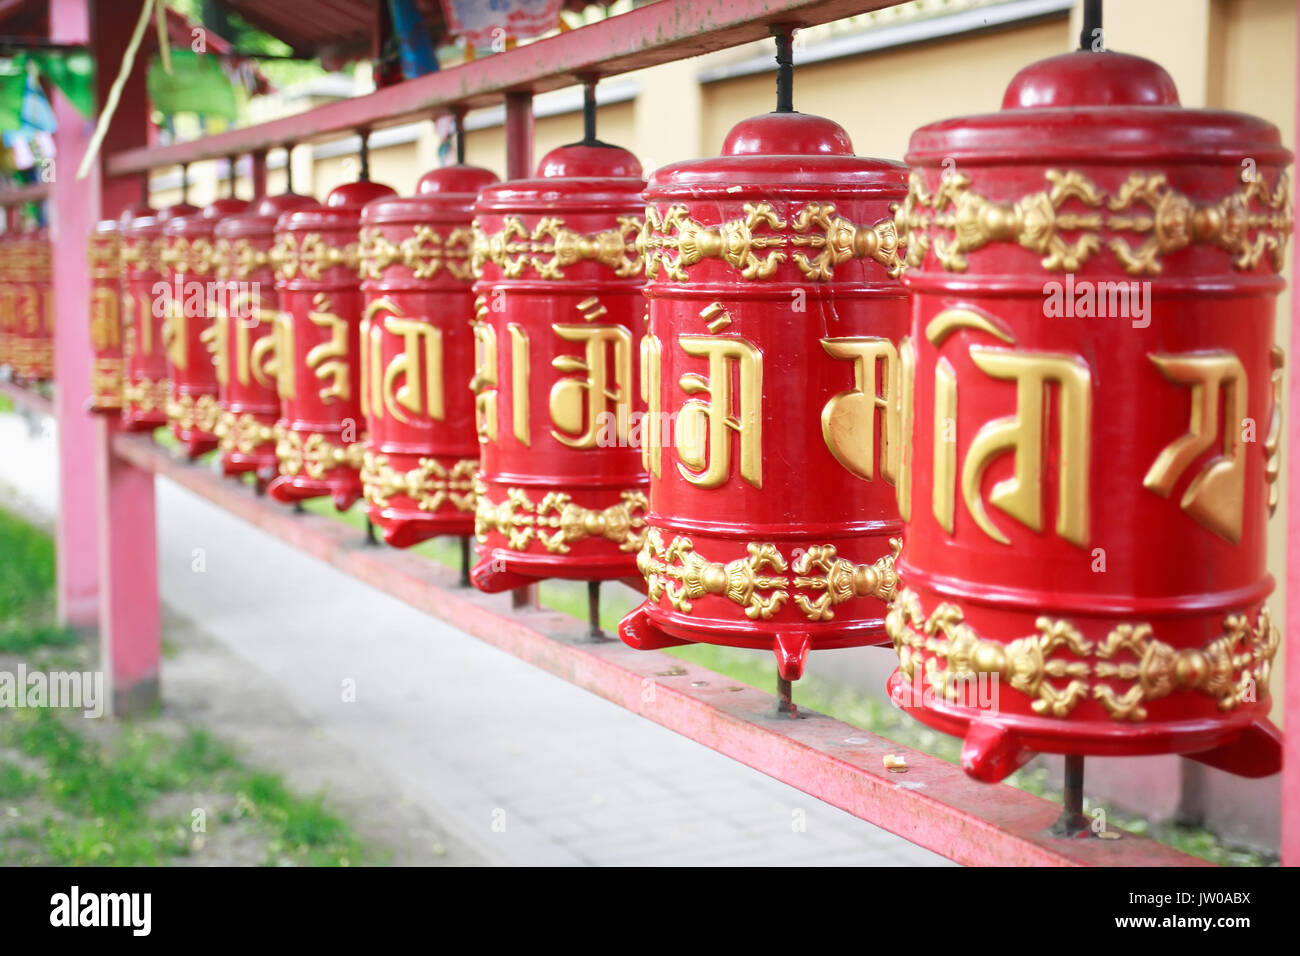 Detail of a Lamaism Datsan temple with red drums in a row Stock Photo